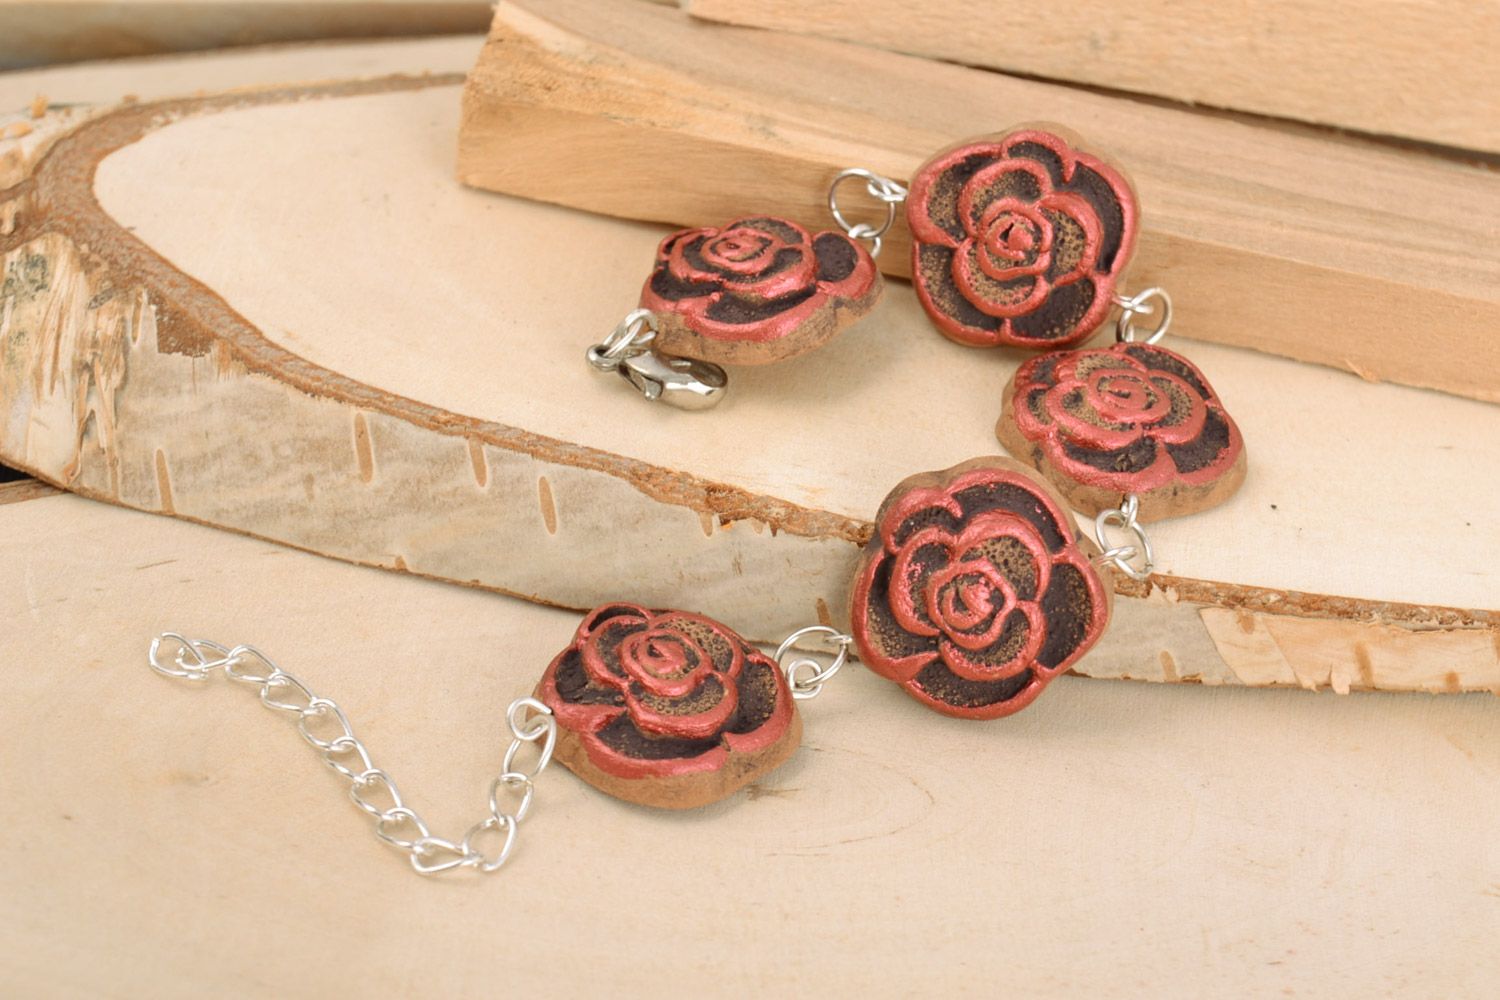 Handmade ethnic wrist bracelet on chain with painted ceramic floral elements photo 1